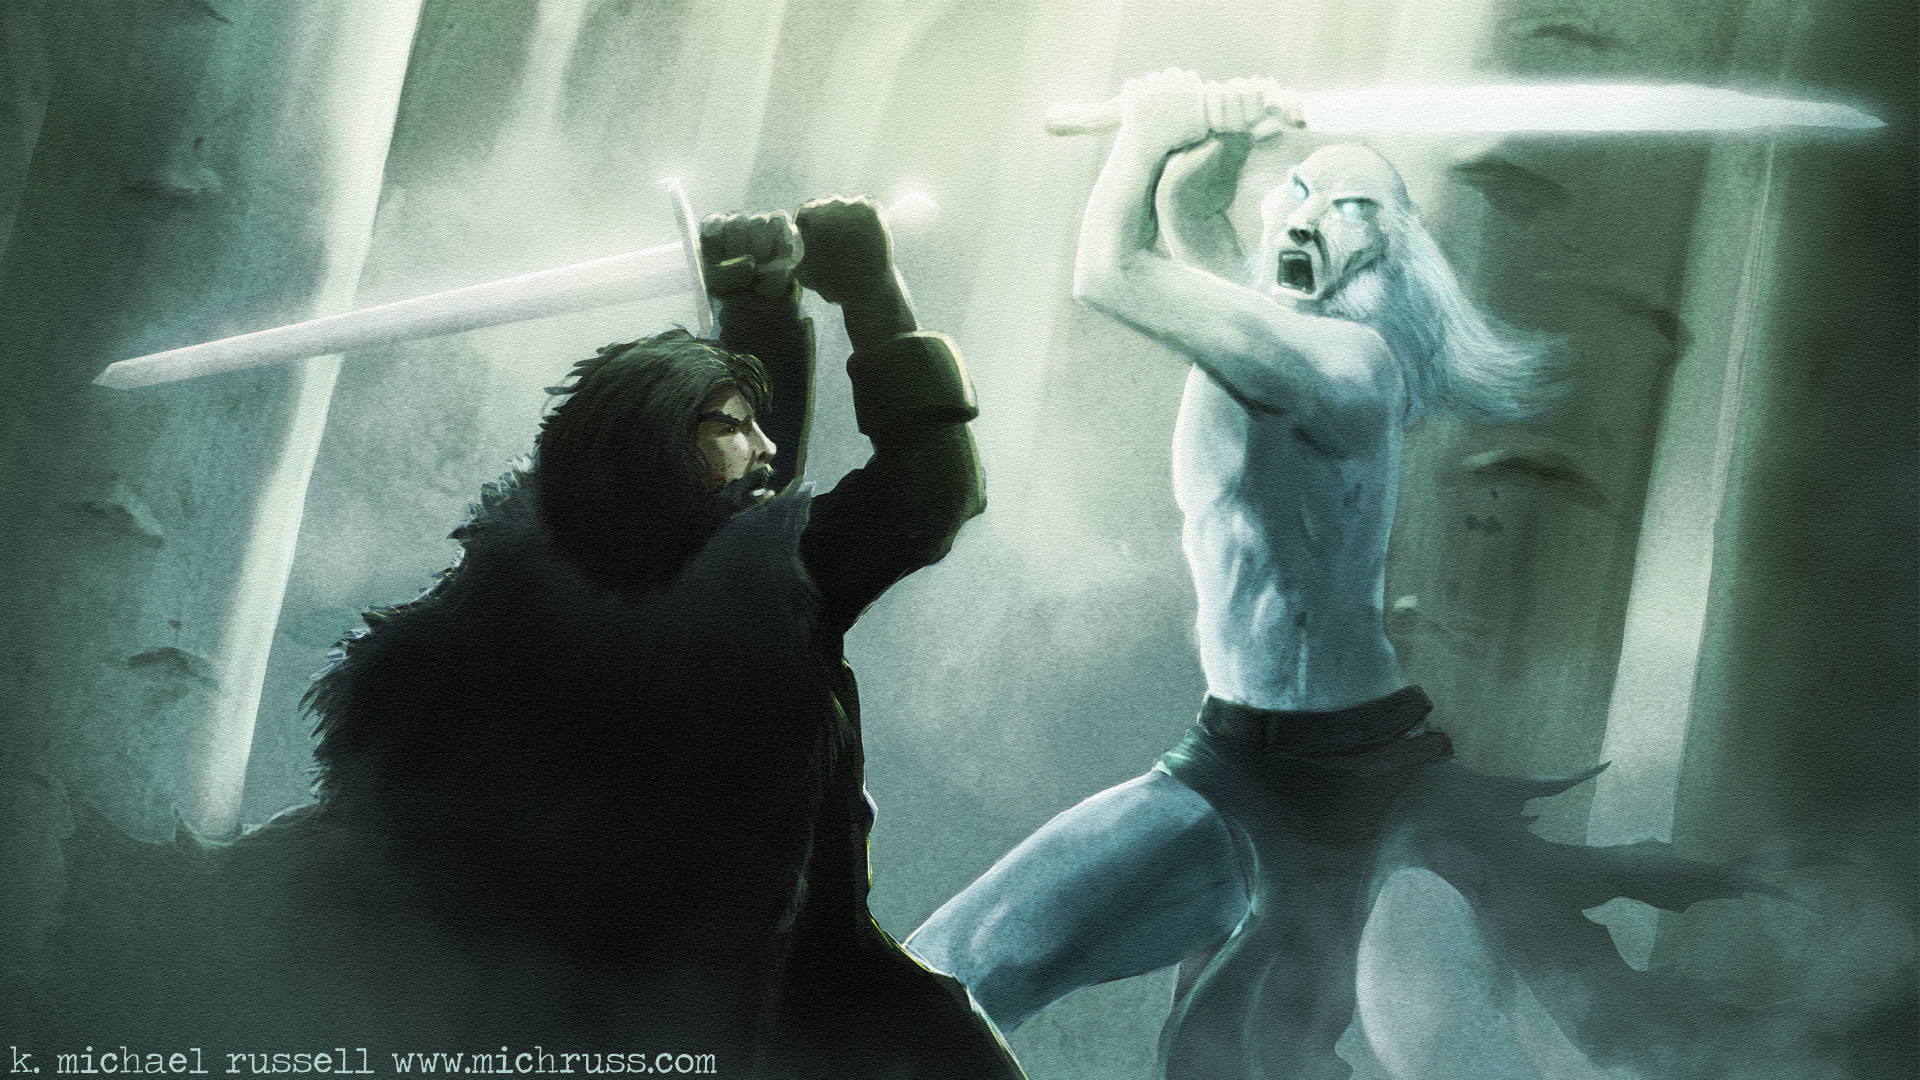 Game of Thrones man of the wall vs white walker by kmichaelrussell